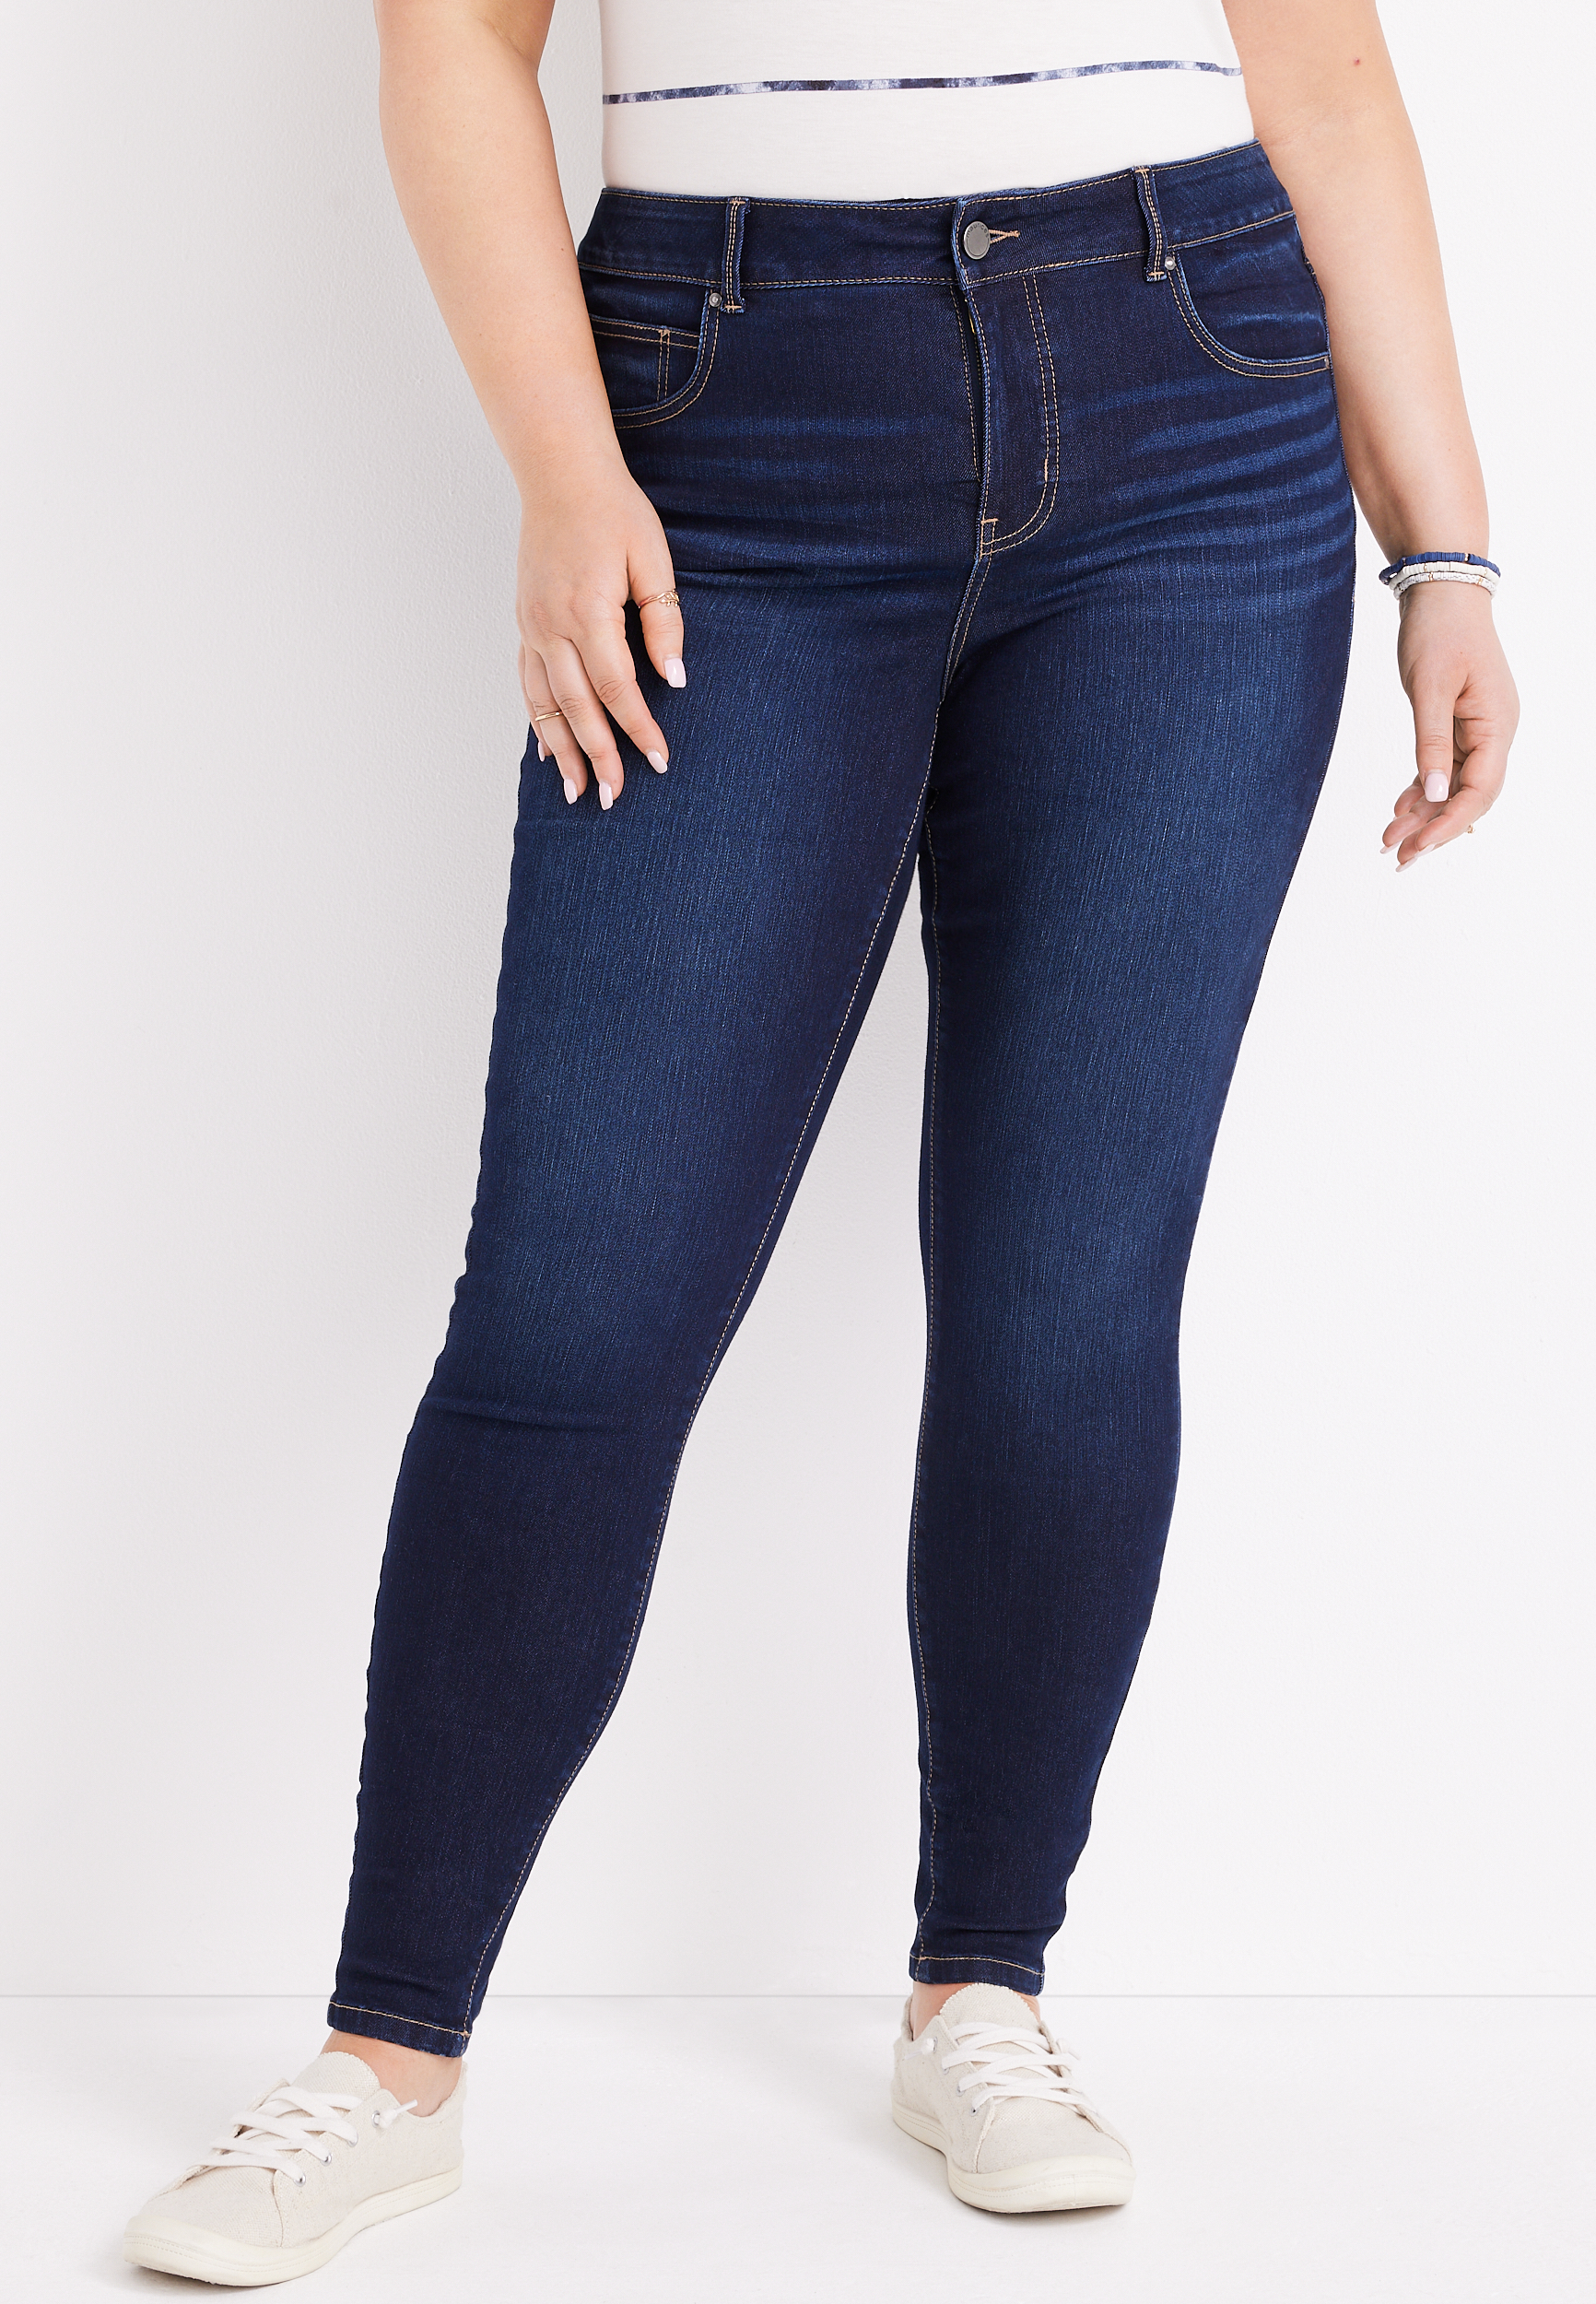 Plus Size m jeans by maurices™ Everflex™ Super Skinny High Rise Jean ...